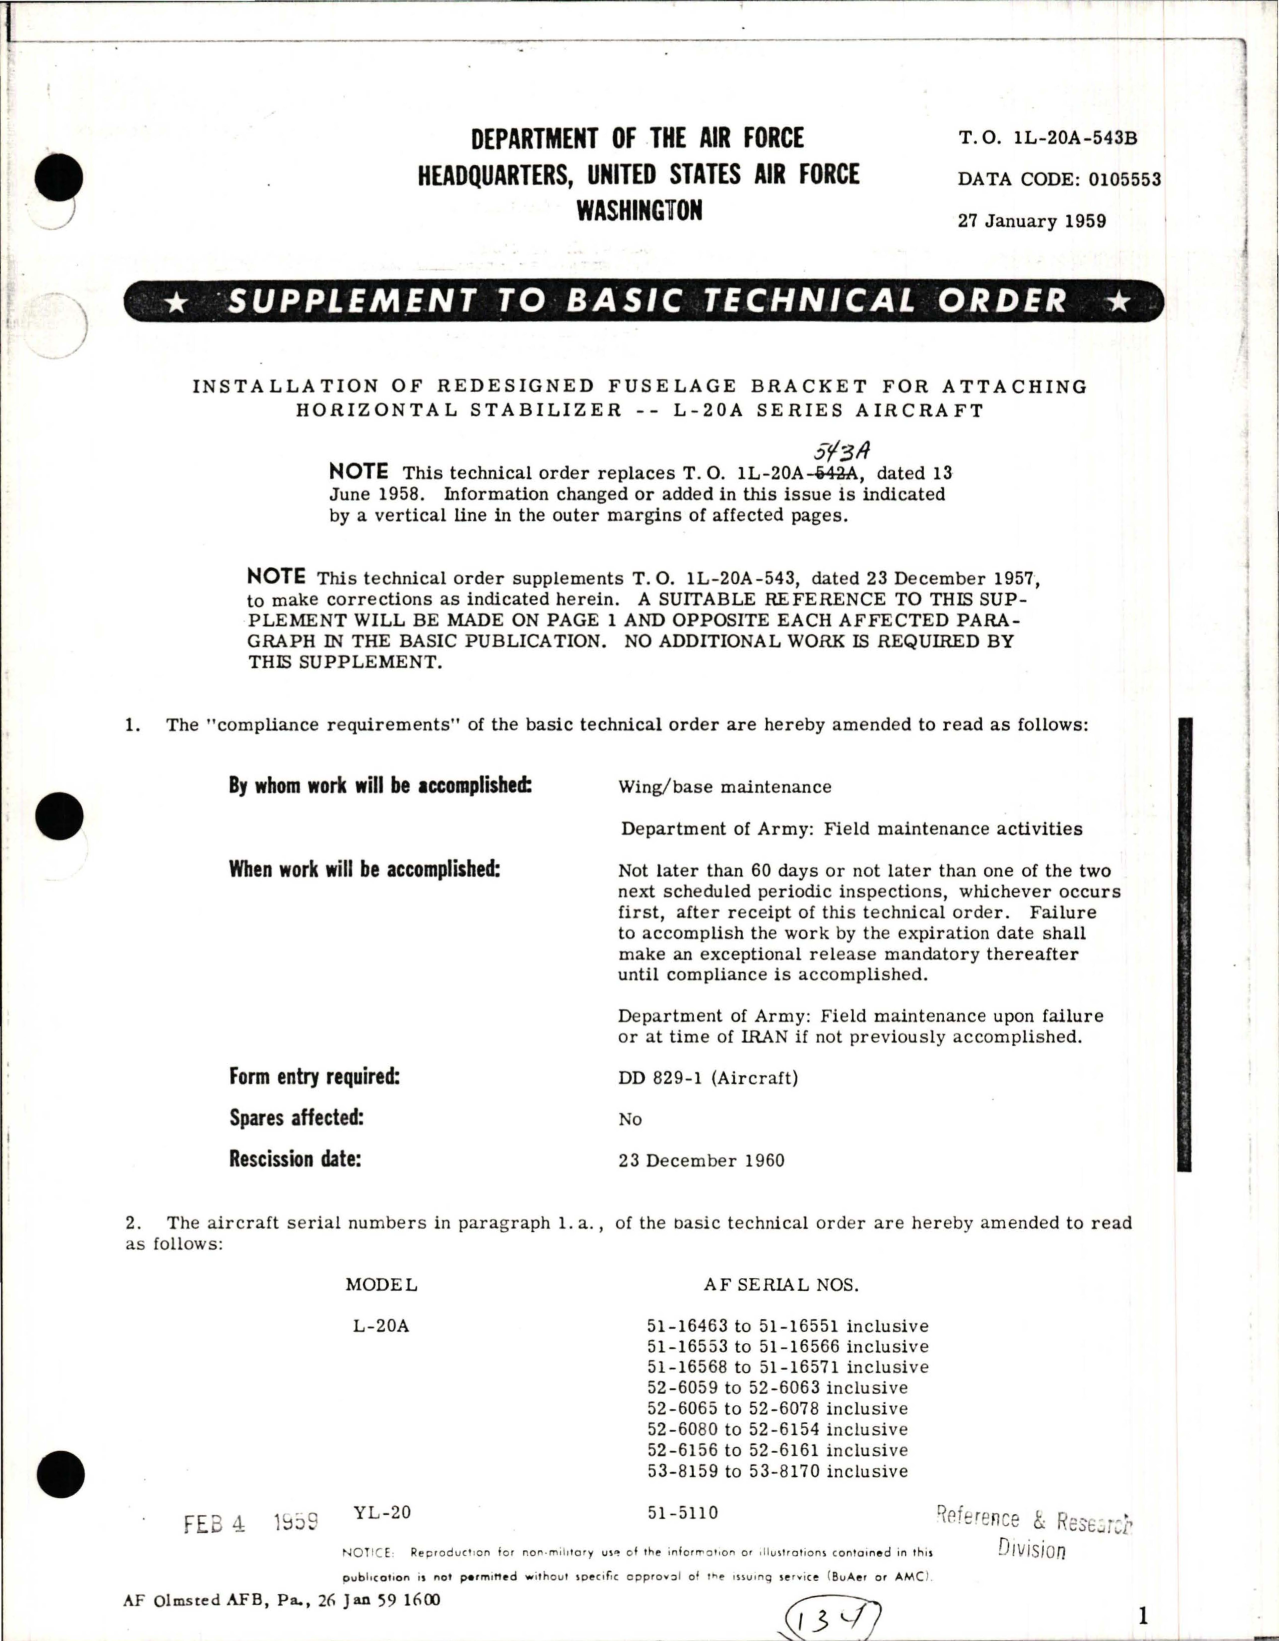 Sample page 1 from AirCorps Library document: Supplement to Installation of Redesigned Fuselage Bracket for Attaching Horizontal Stabilizer - L-20A Series